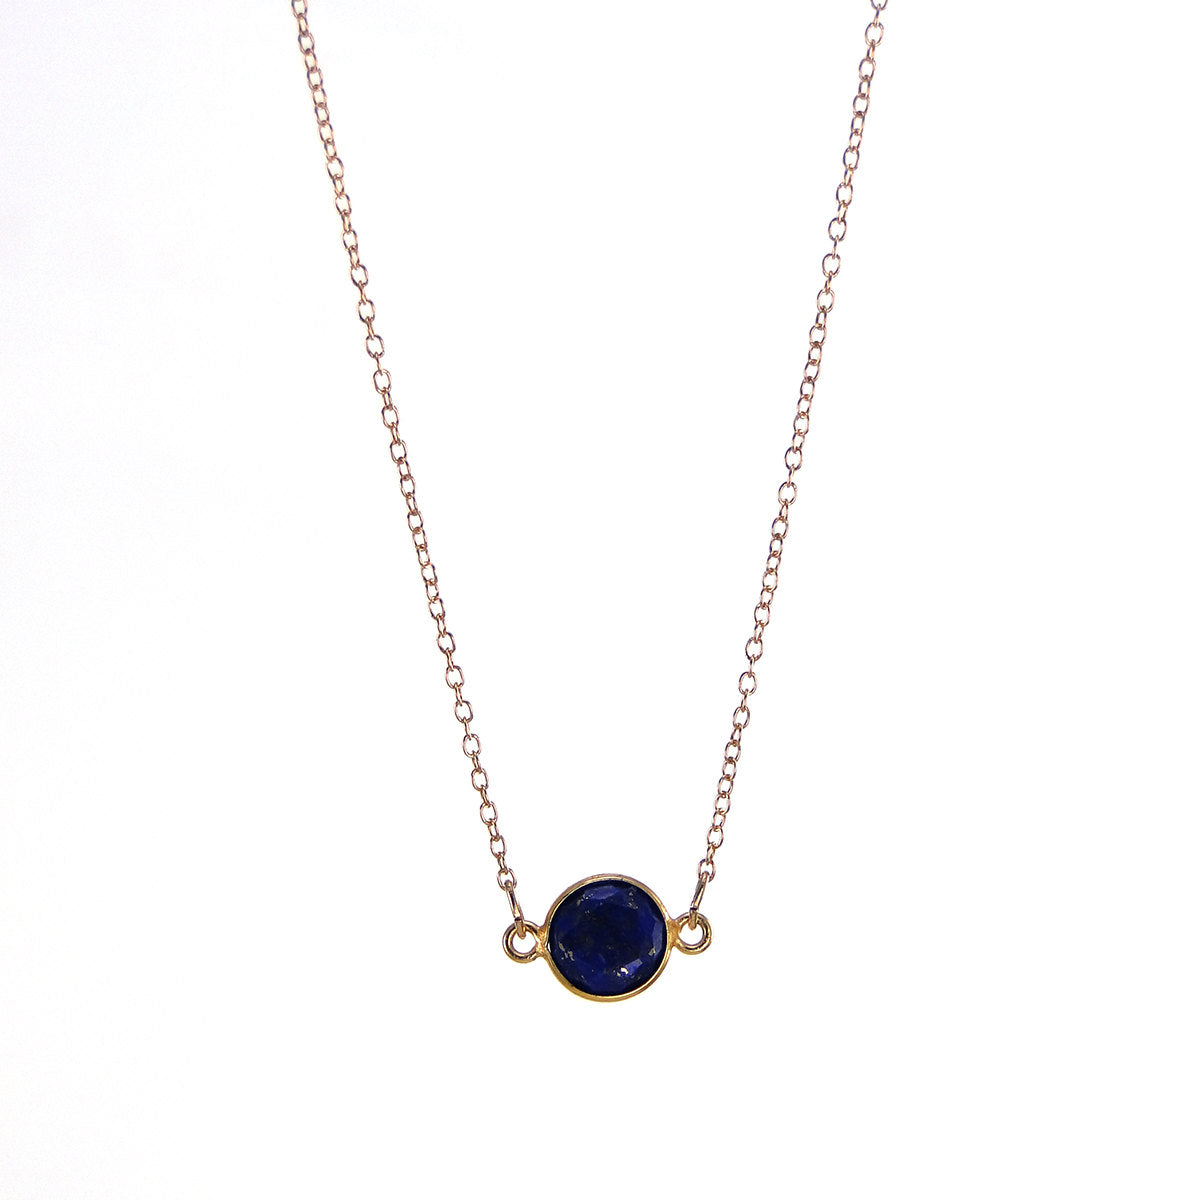 Lapis Delicate Gemstone Necklace - Navy Blue Dainty Necklace - Dark blue Necklace - Cute Gold Necklace - Gold Filled Necklace - Womens Gift